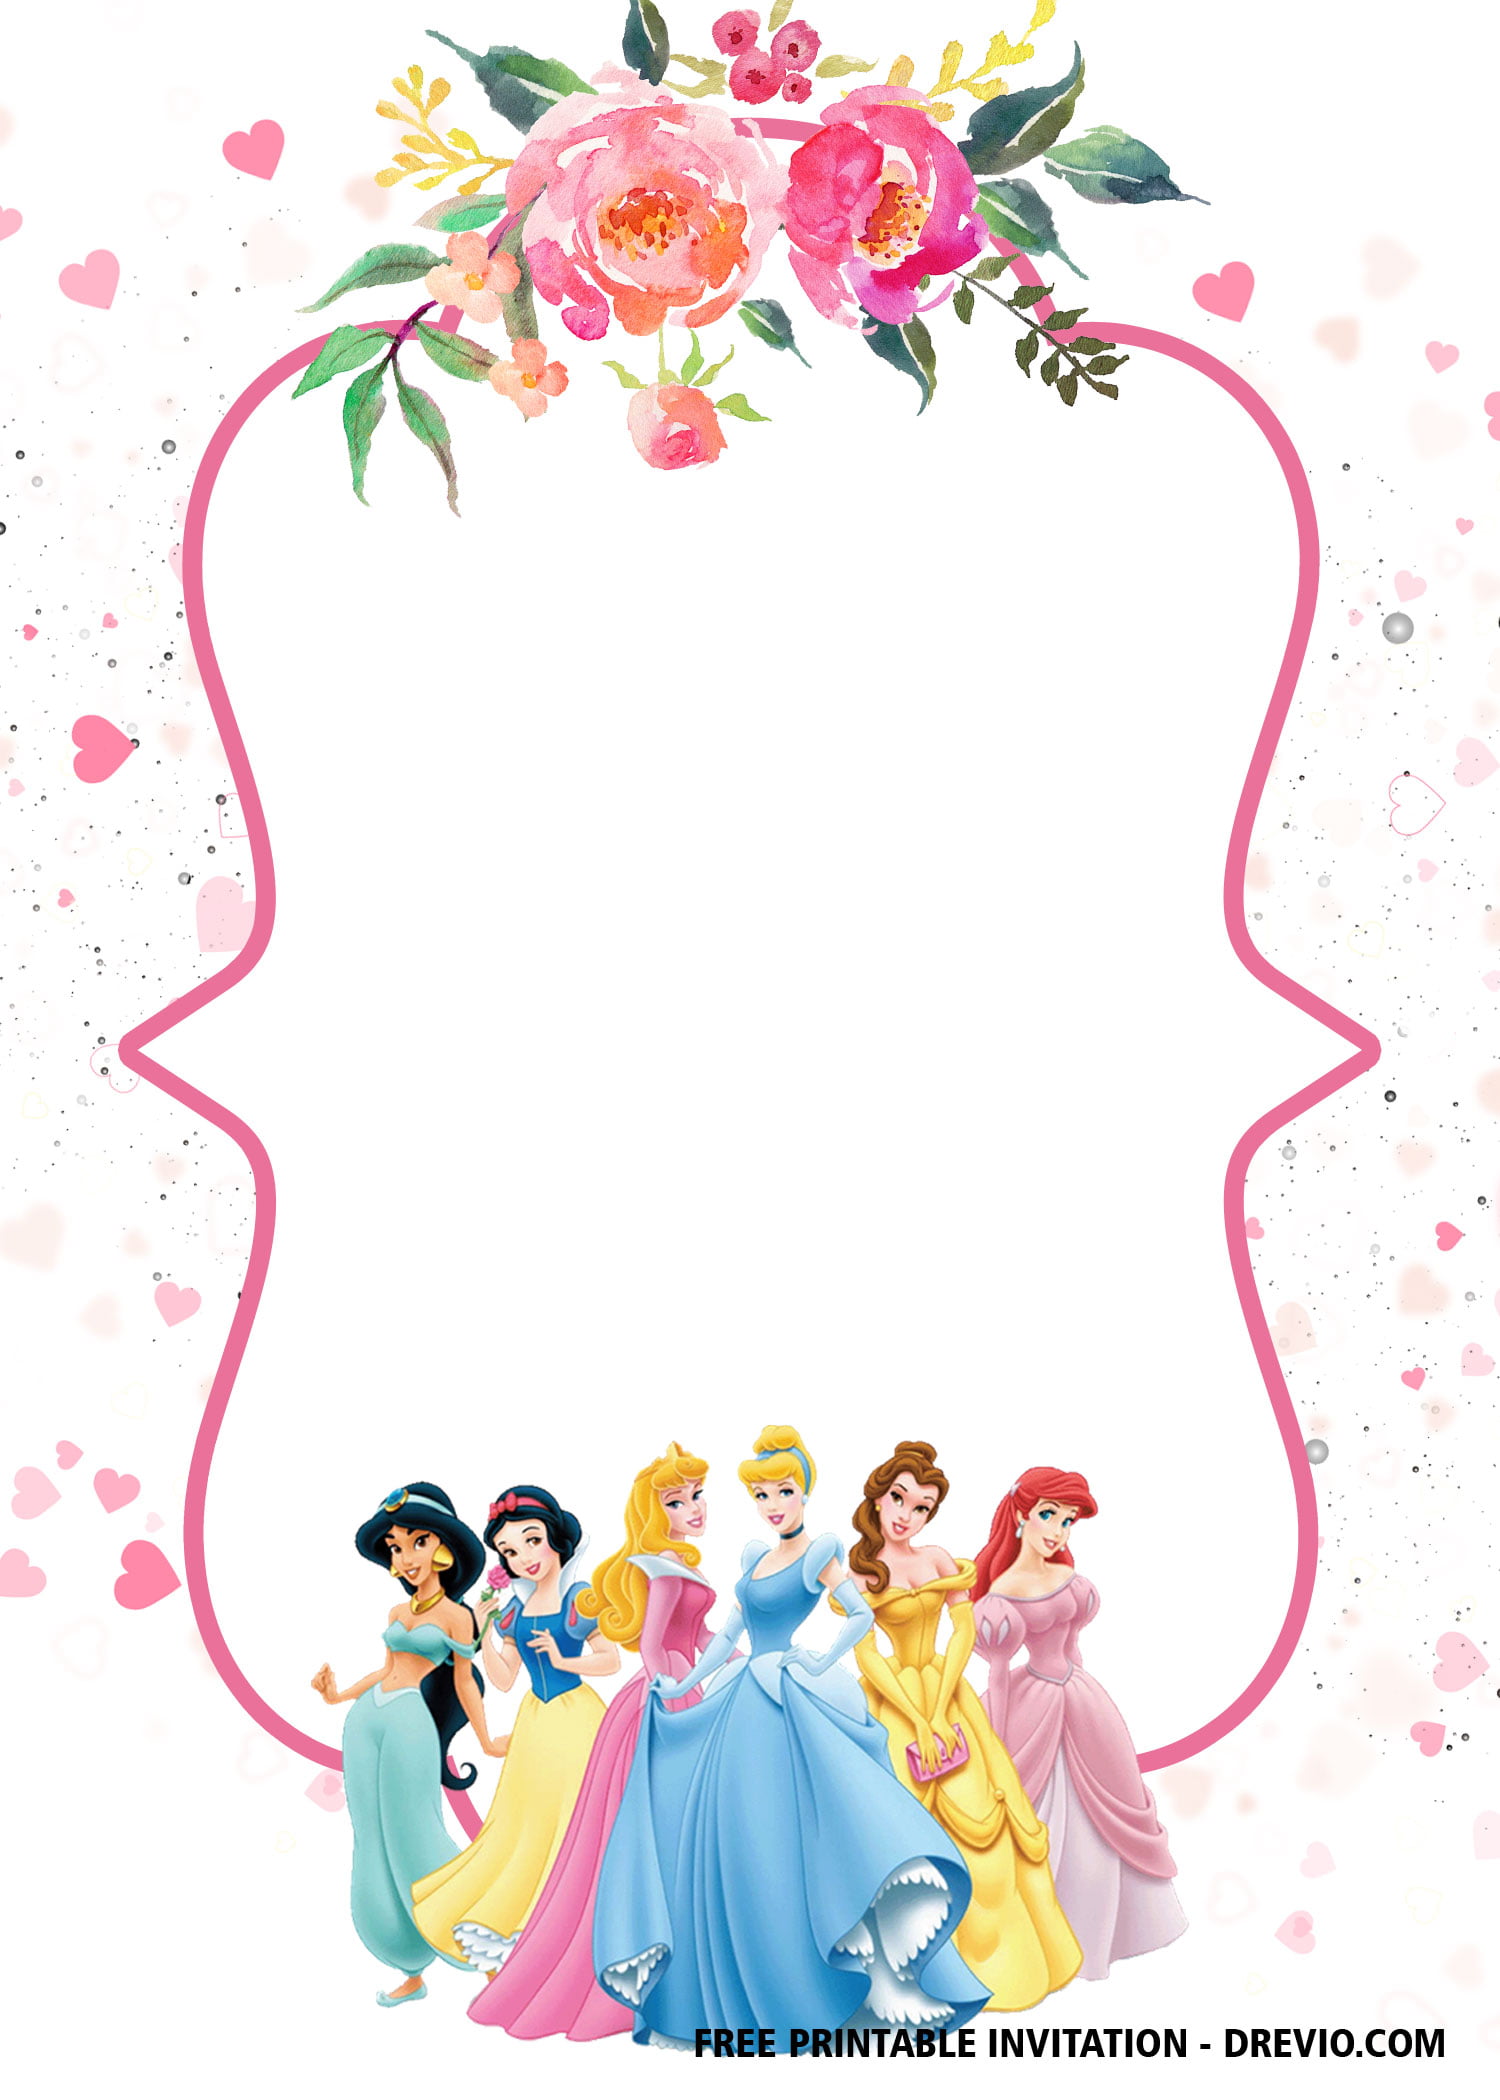 FREE Disney Princess Invitation Template for Your Little Girl’s